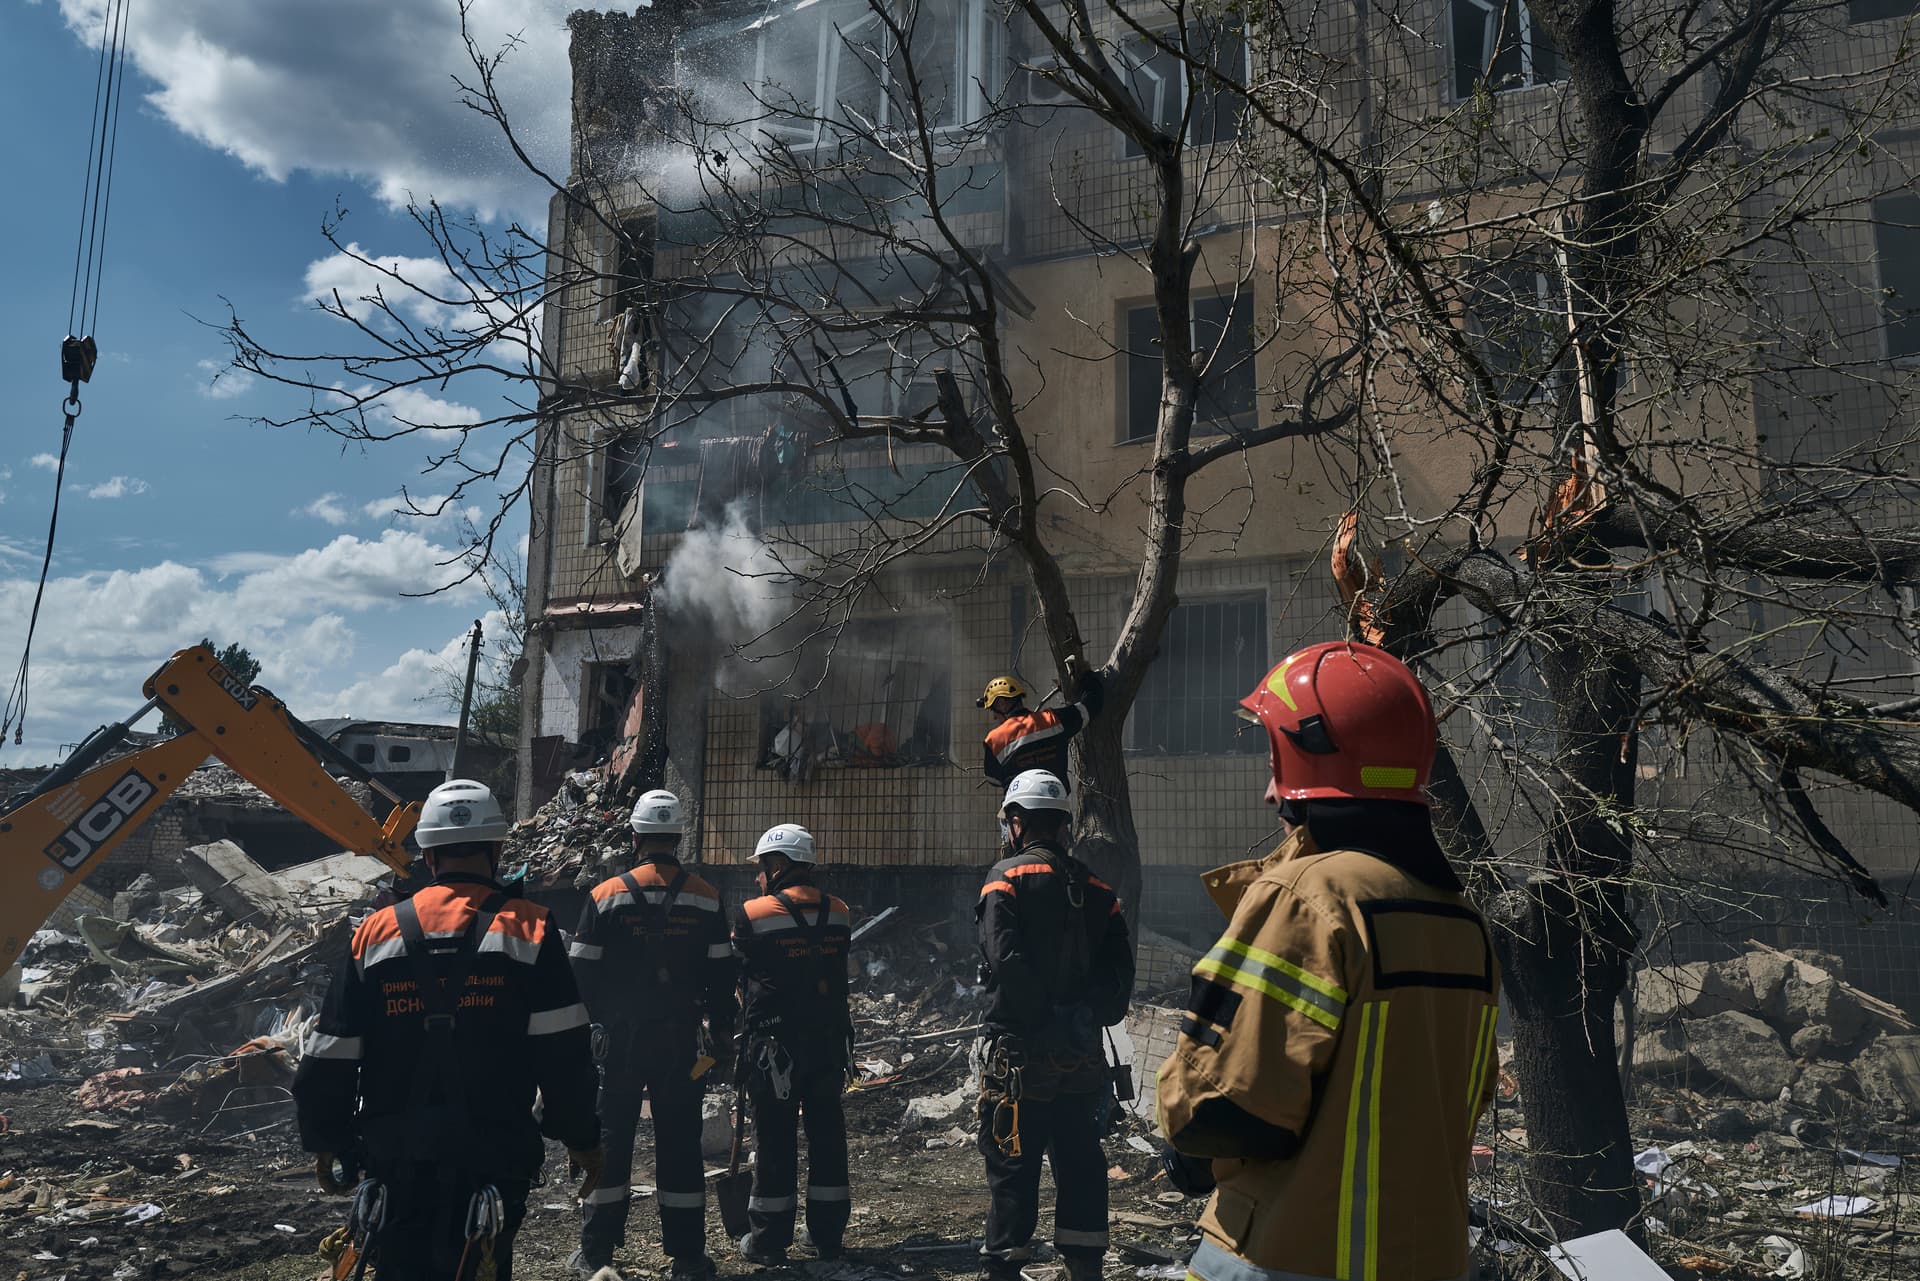 Emergency personnel work at the scene after a missile hit an apartment building in Kryvyi Rih